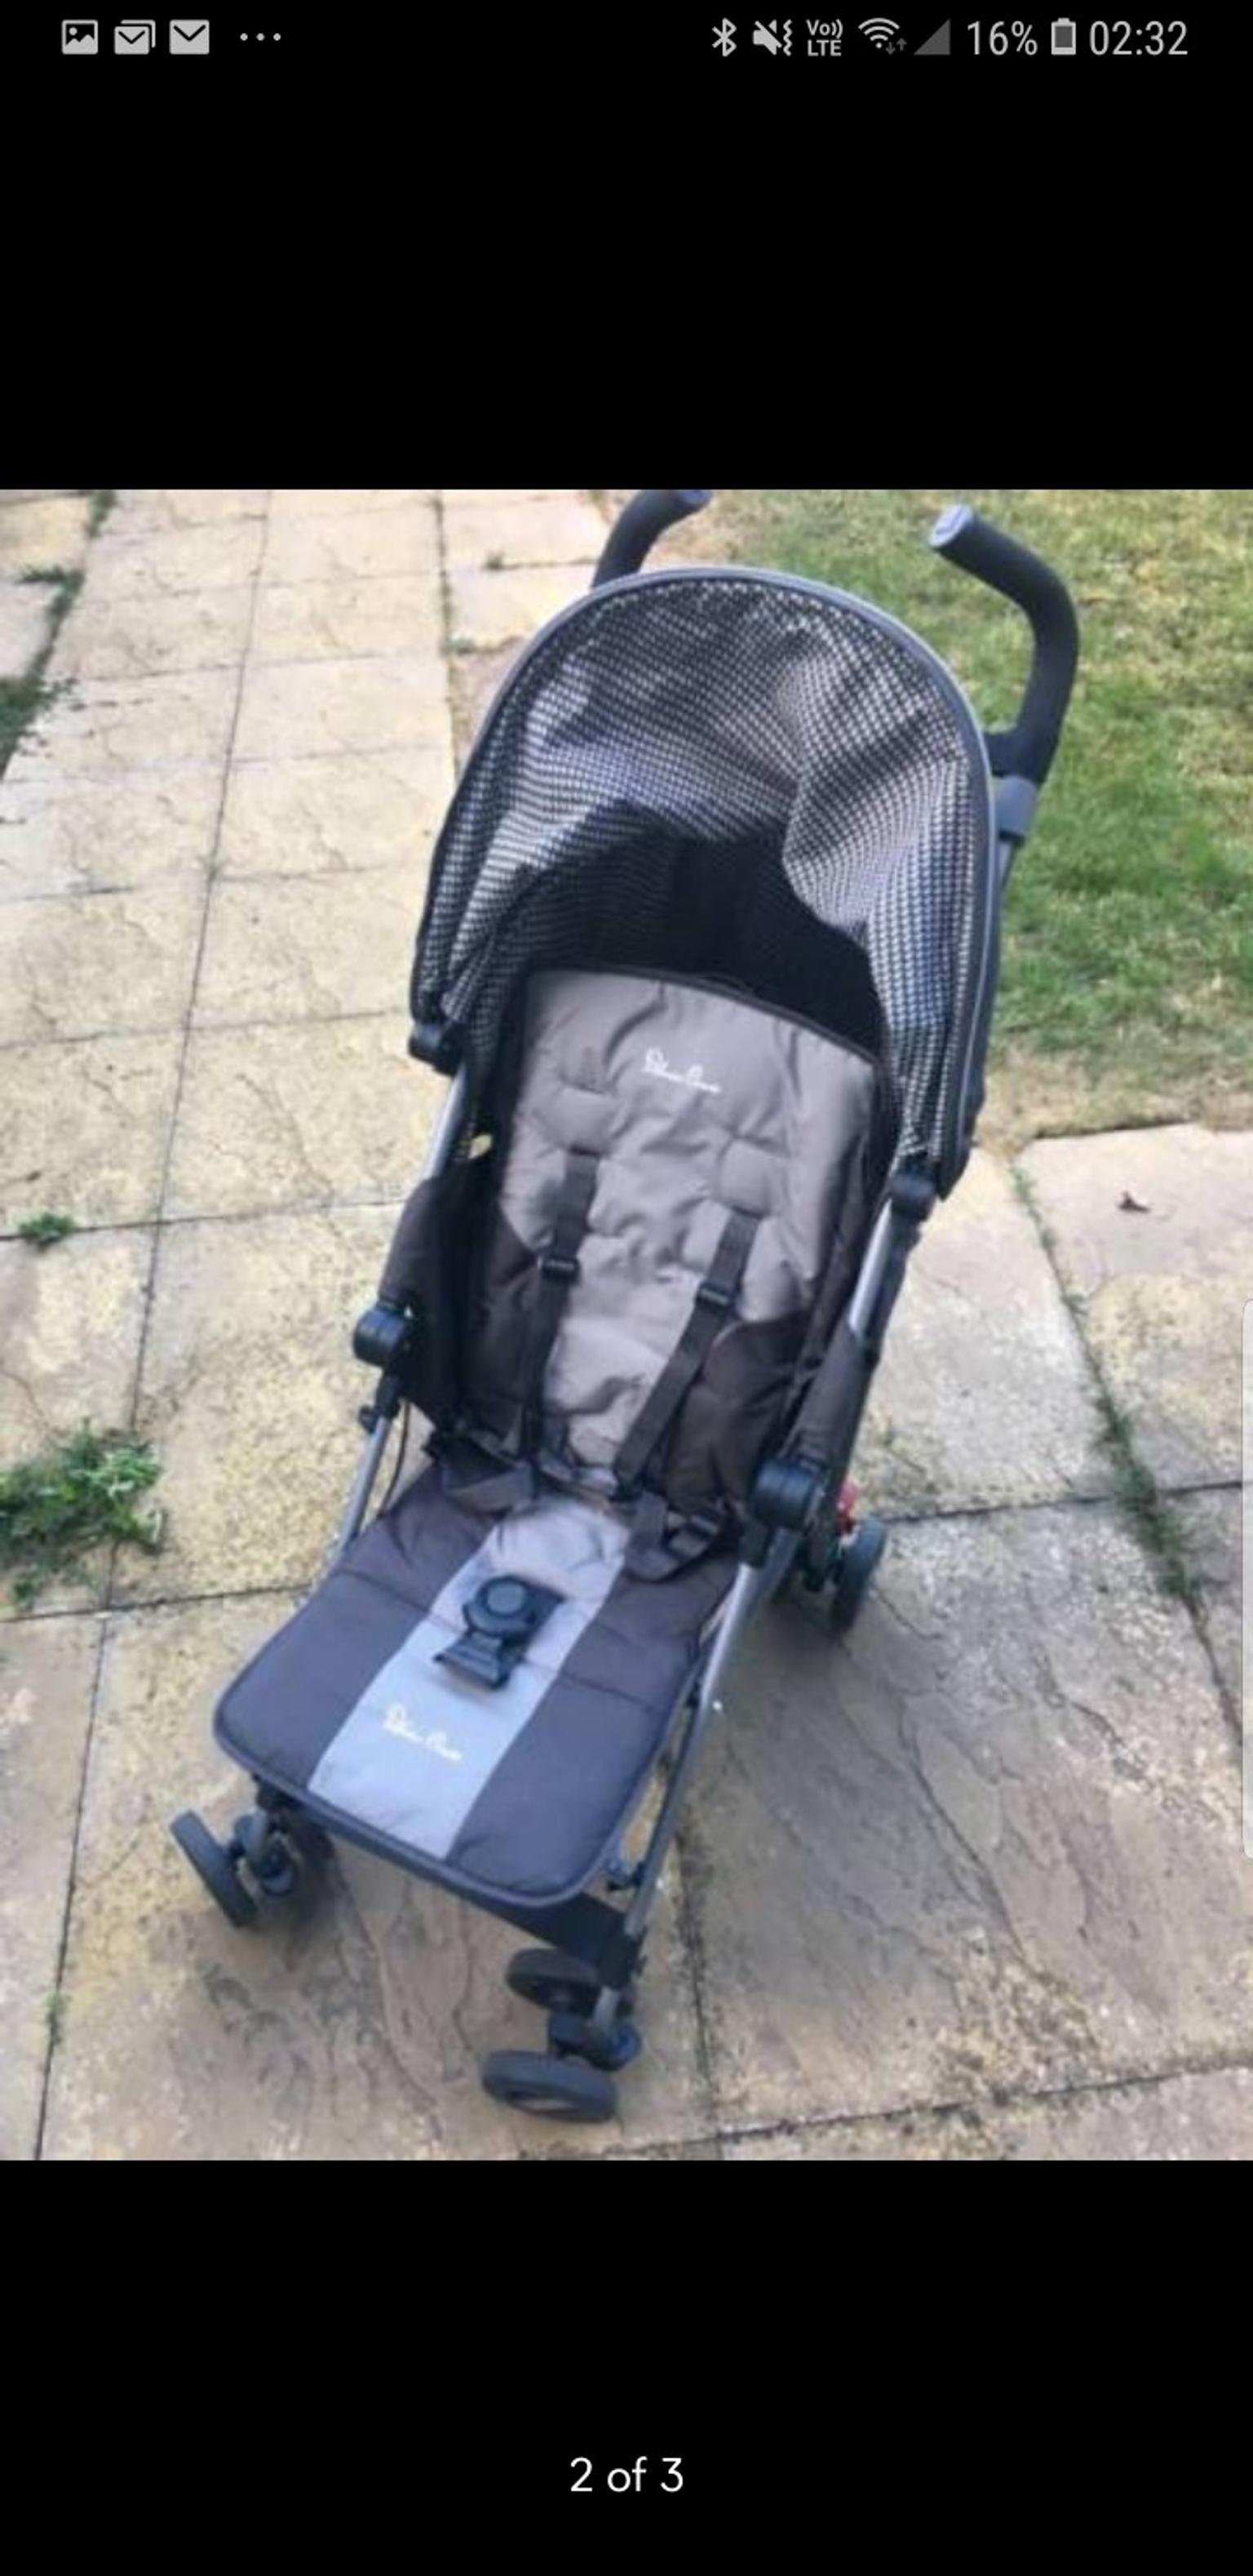 pushchair up to 25kg